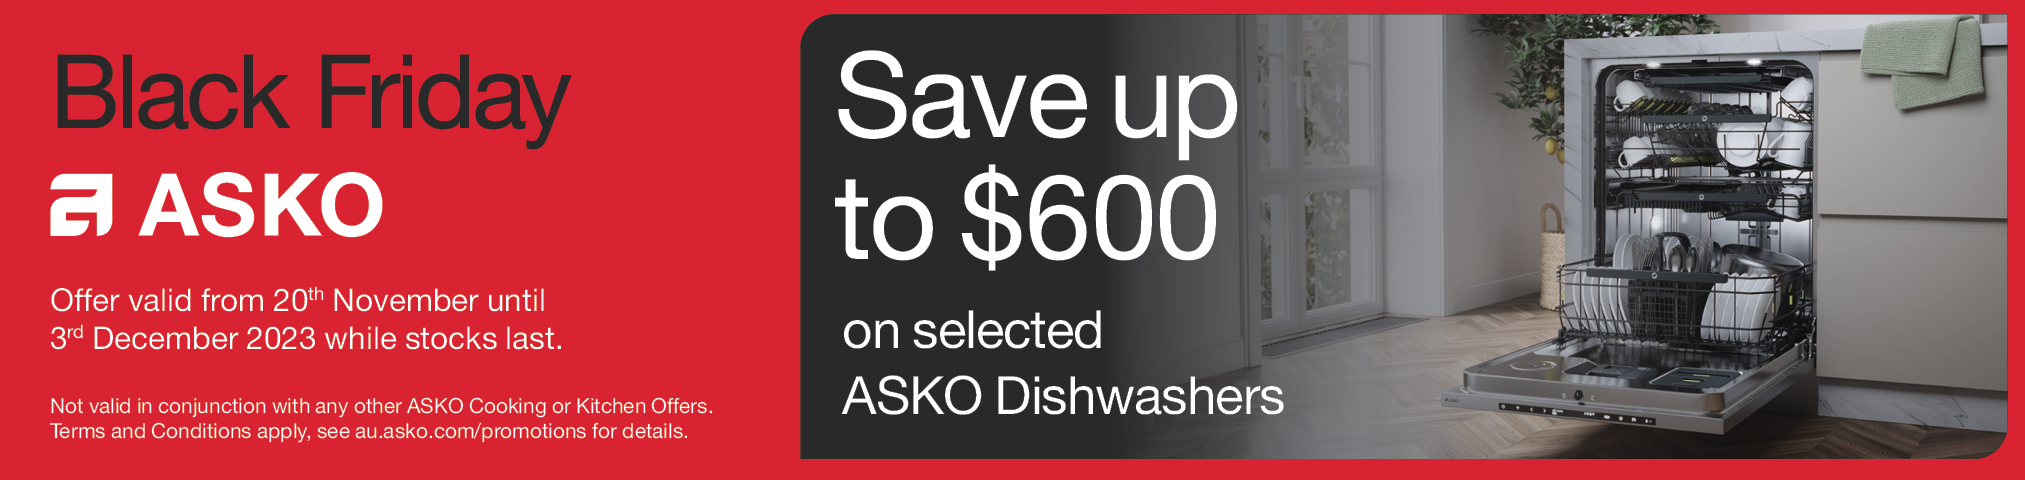 Save Up To $600 On Selected ASKO Dishwashers*